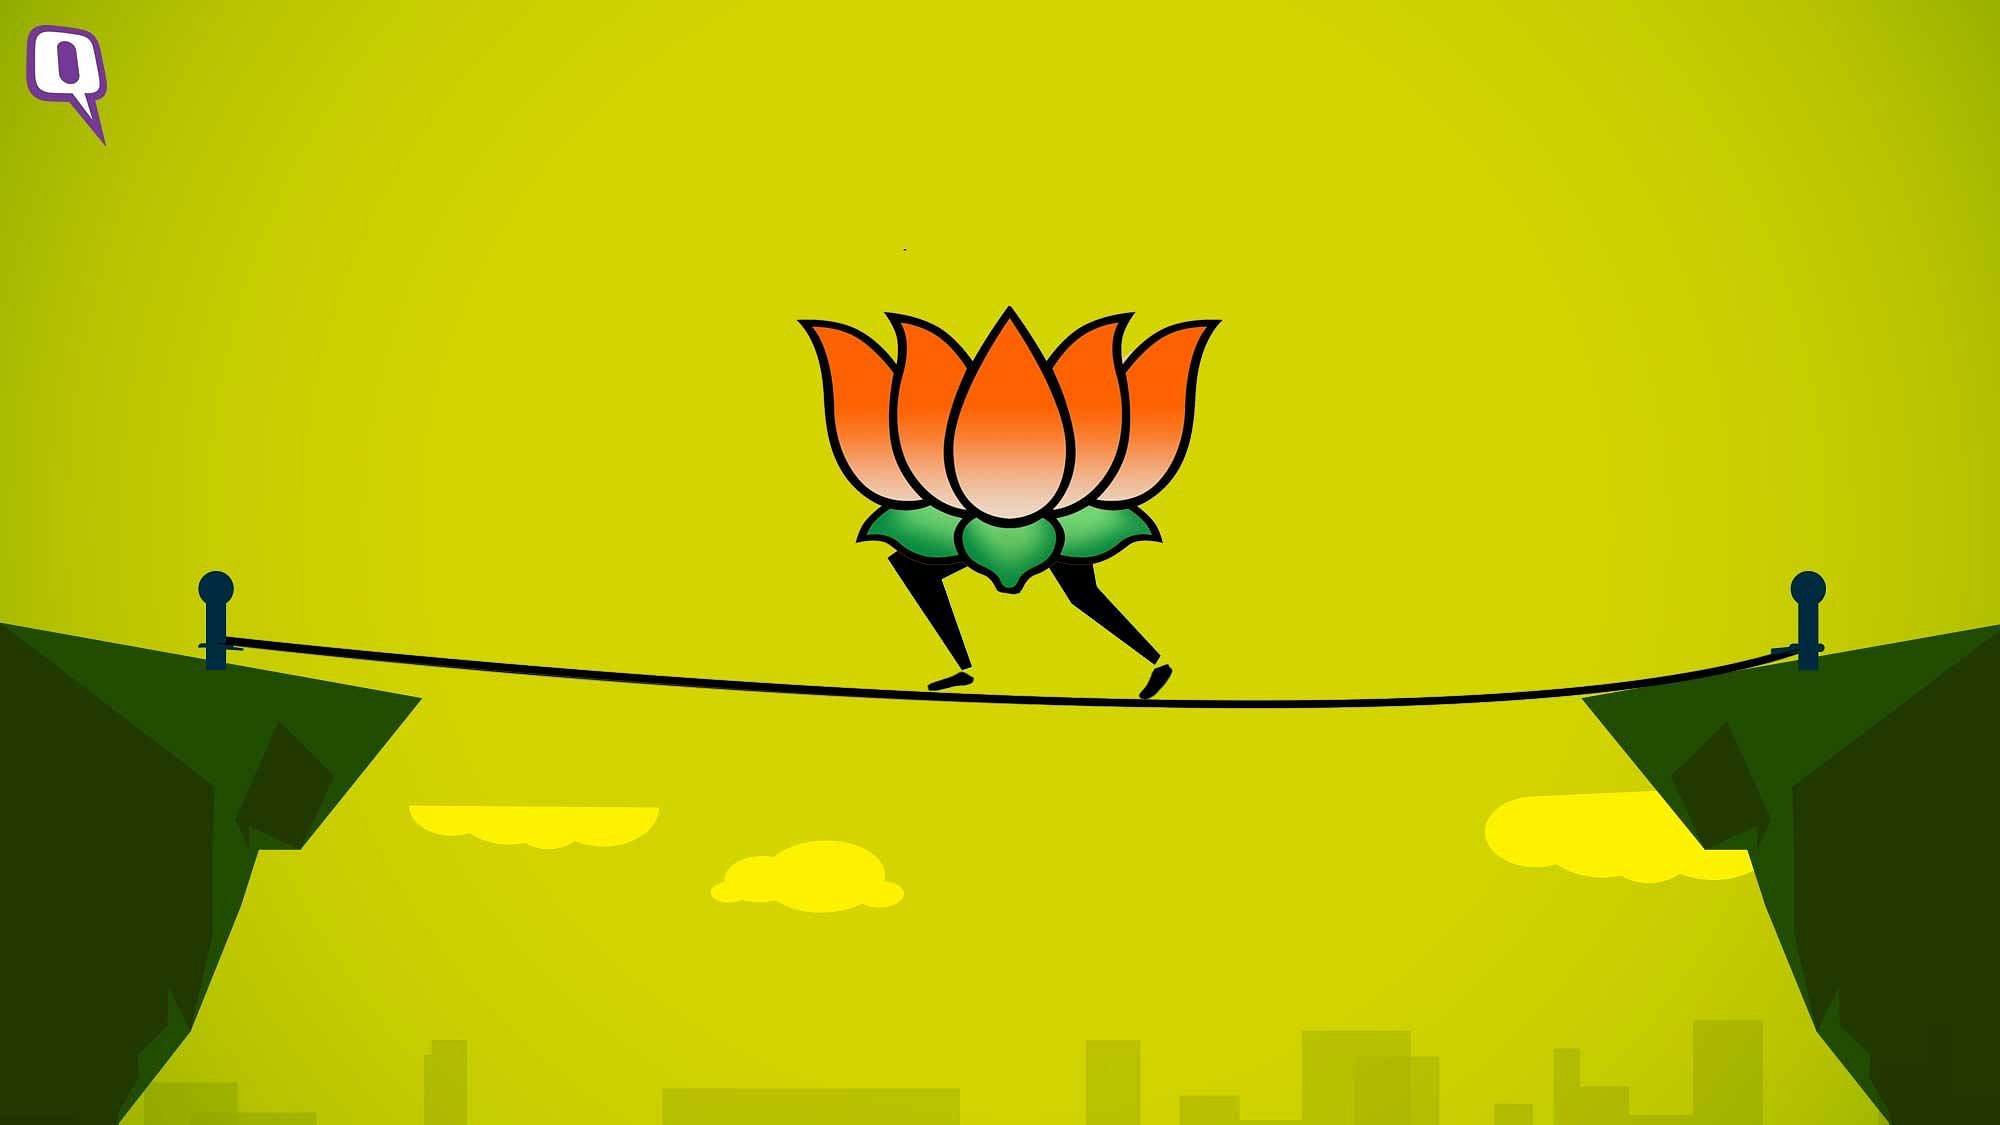 What can BJP then do to aim for a majority on its own in the next election to ensure Narendra Modi continues as Prime Minister for one more term?